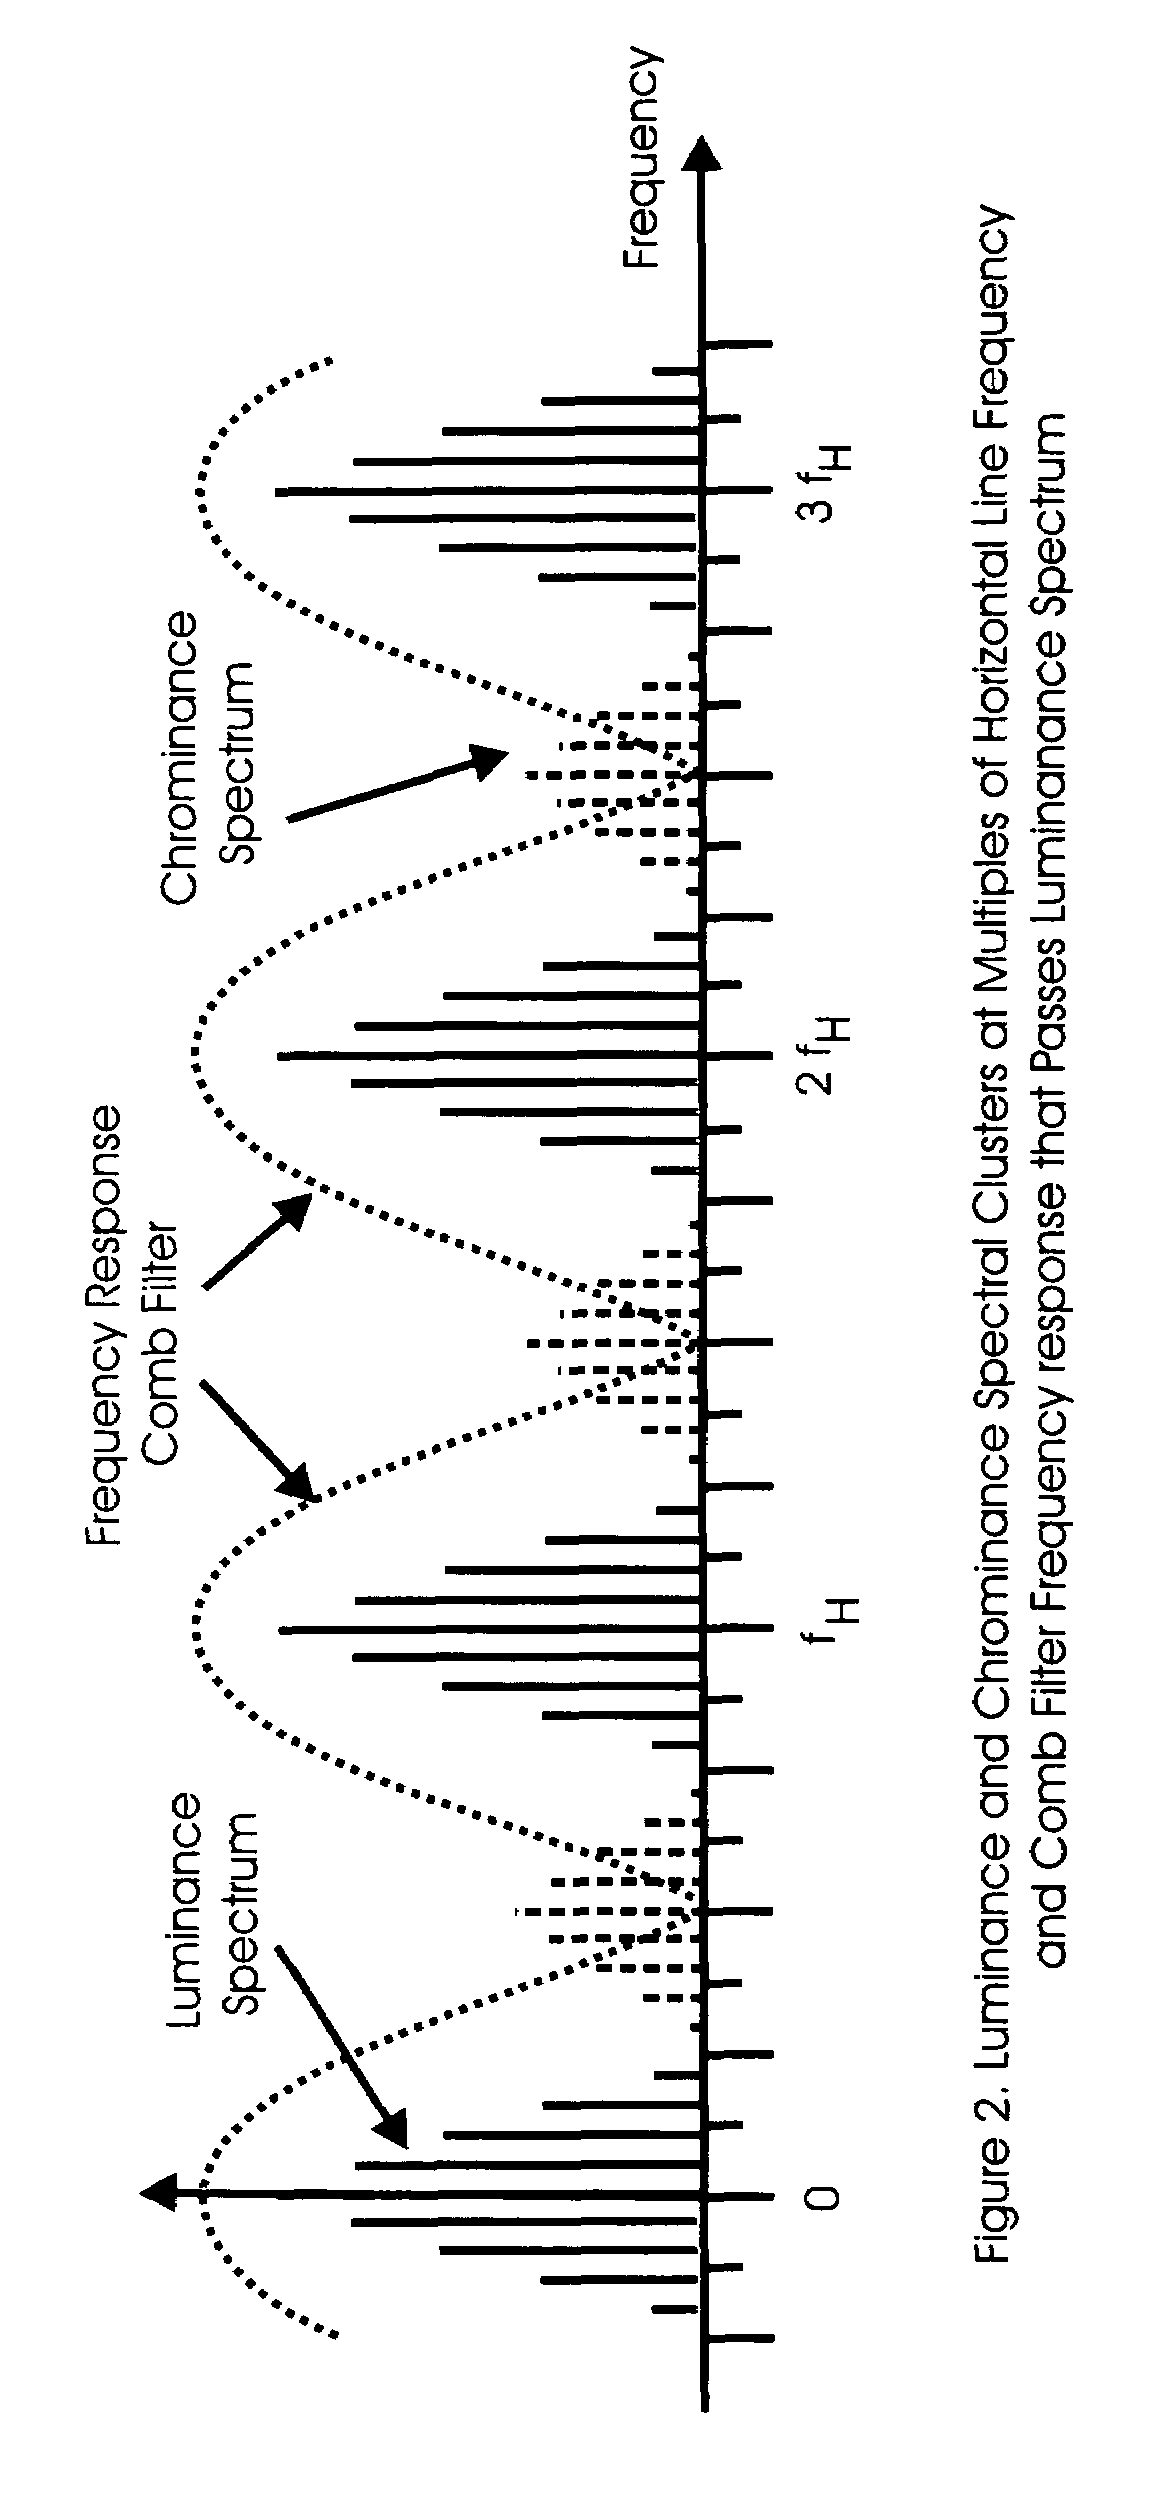 System and method for nondisruptively embedding an OFDM modulated data signal into a composite video signal